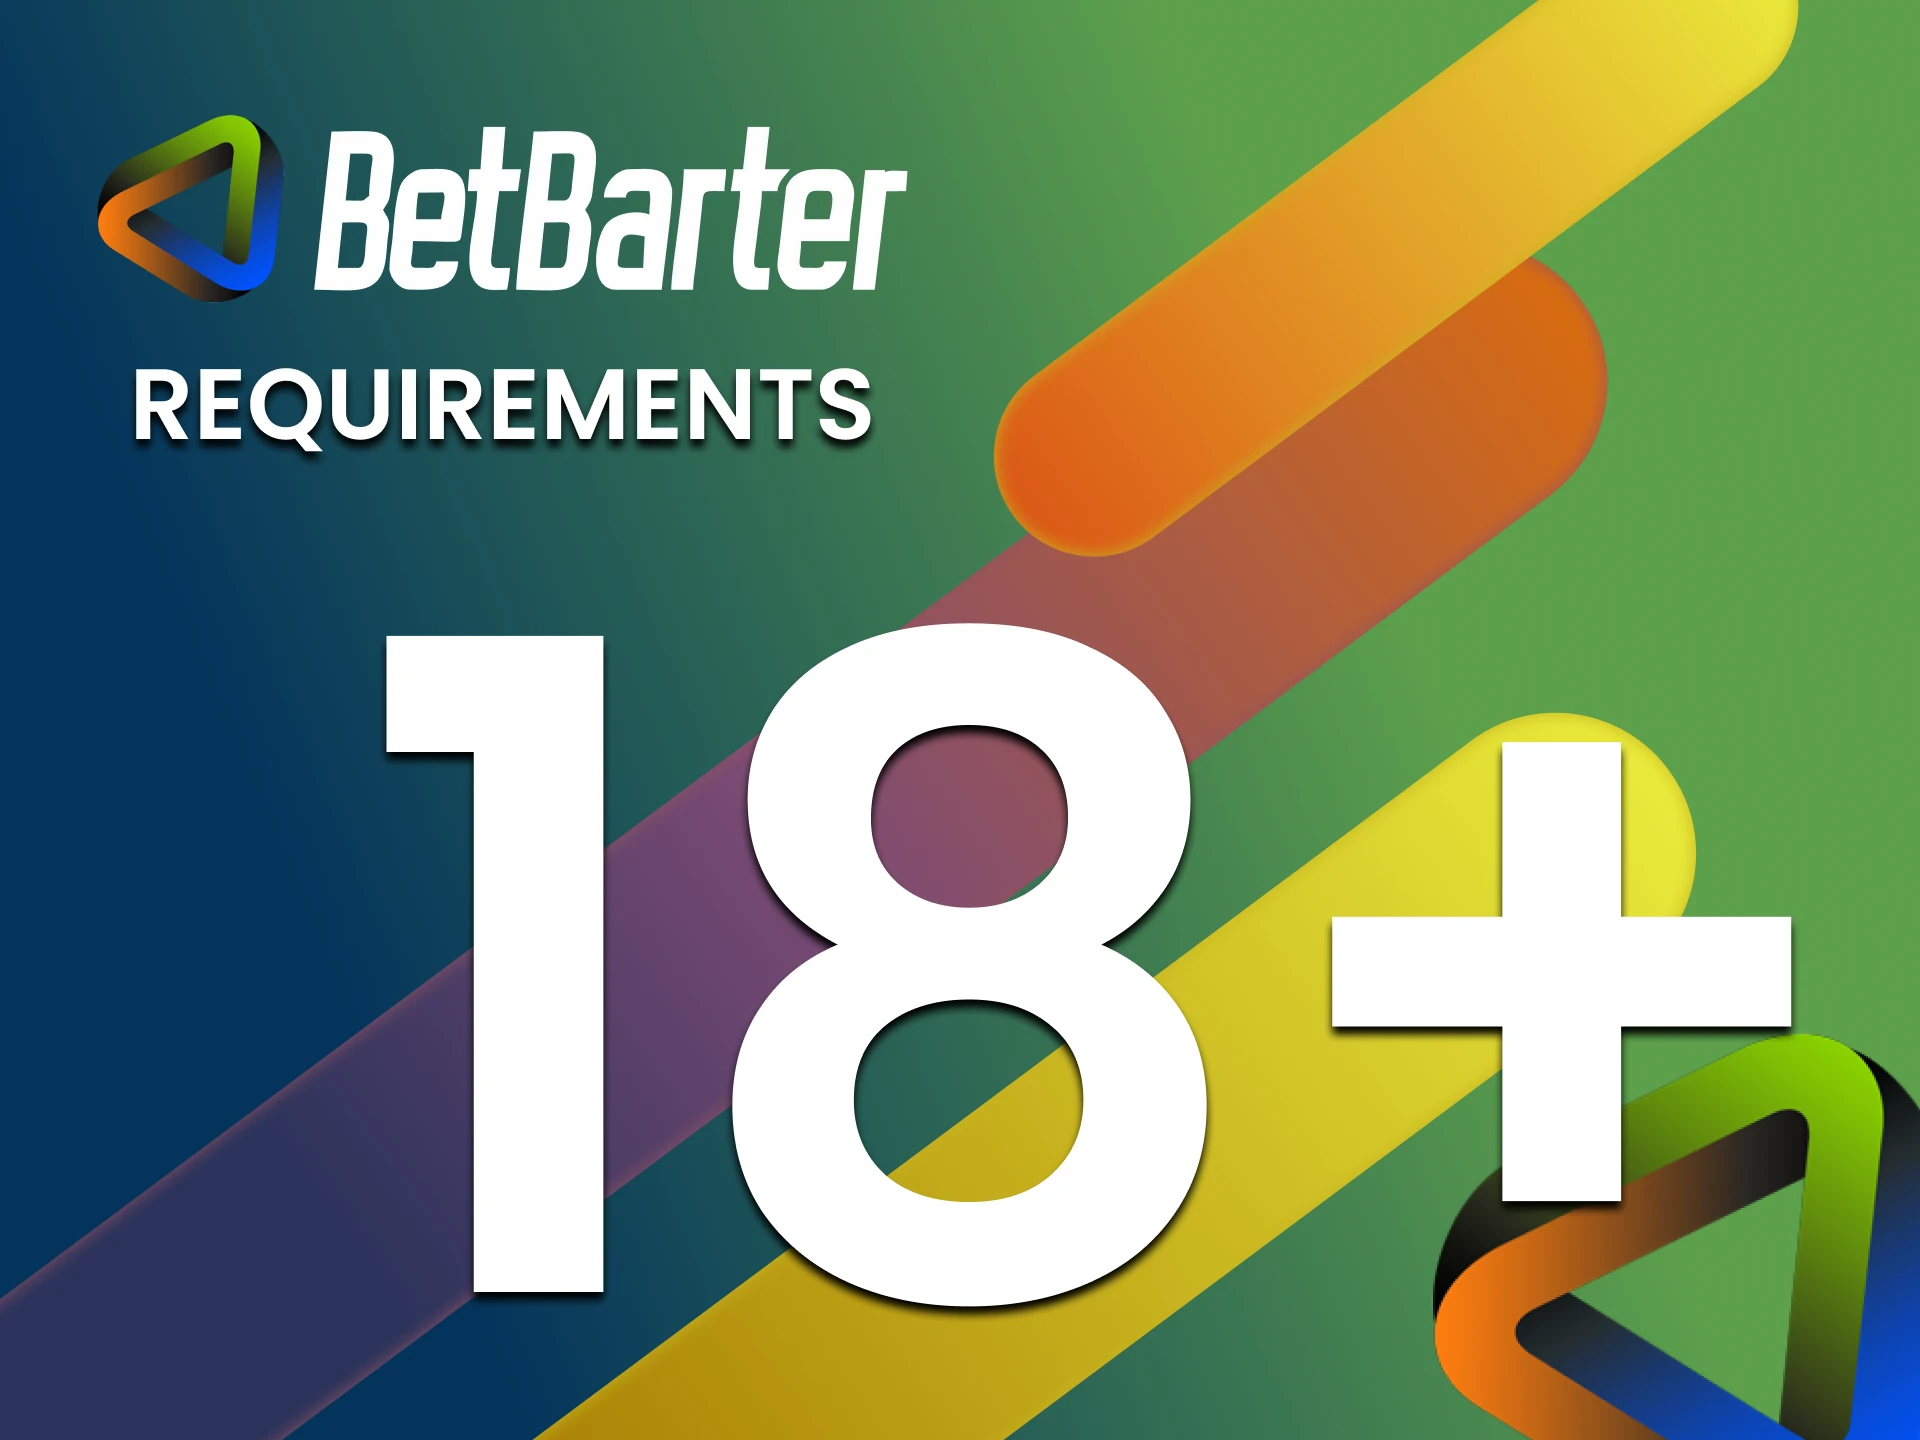 We will tell you about the requirements for registering on BetBarter.